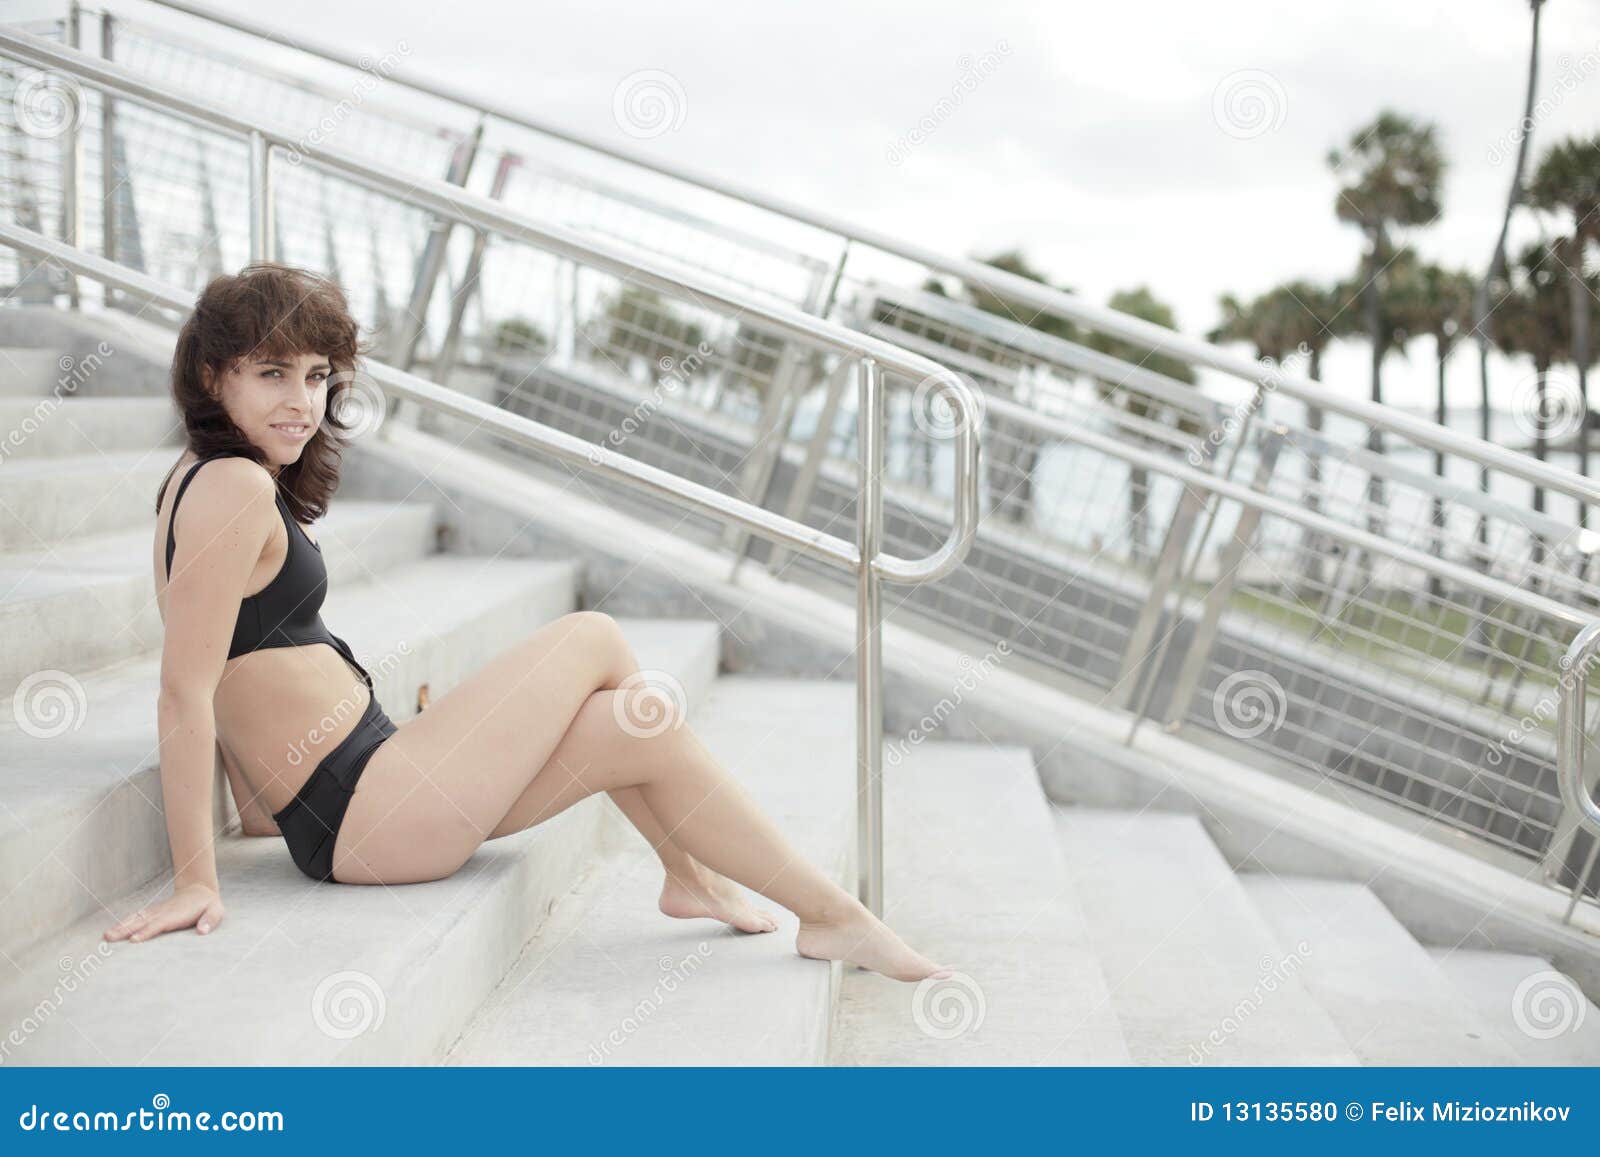 Woman Posing On Stairs Stock Photo Image Of Pretty Knee